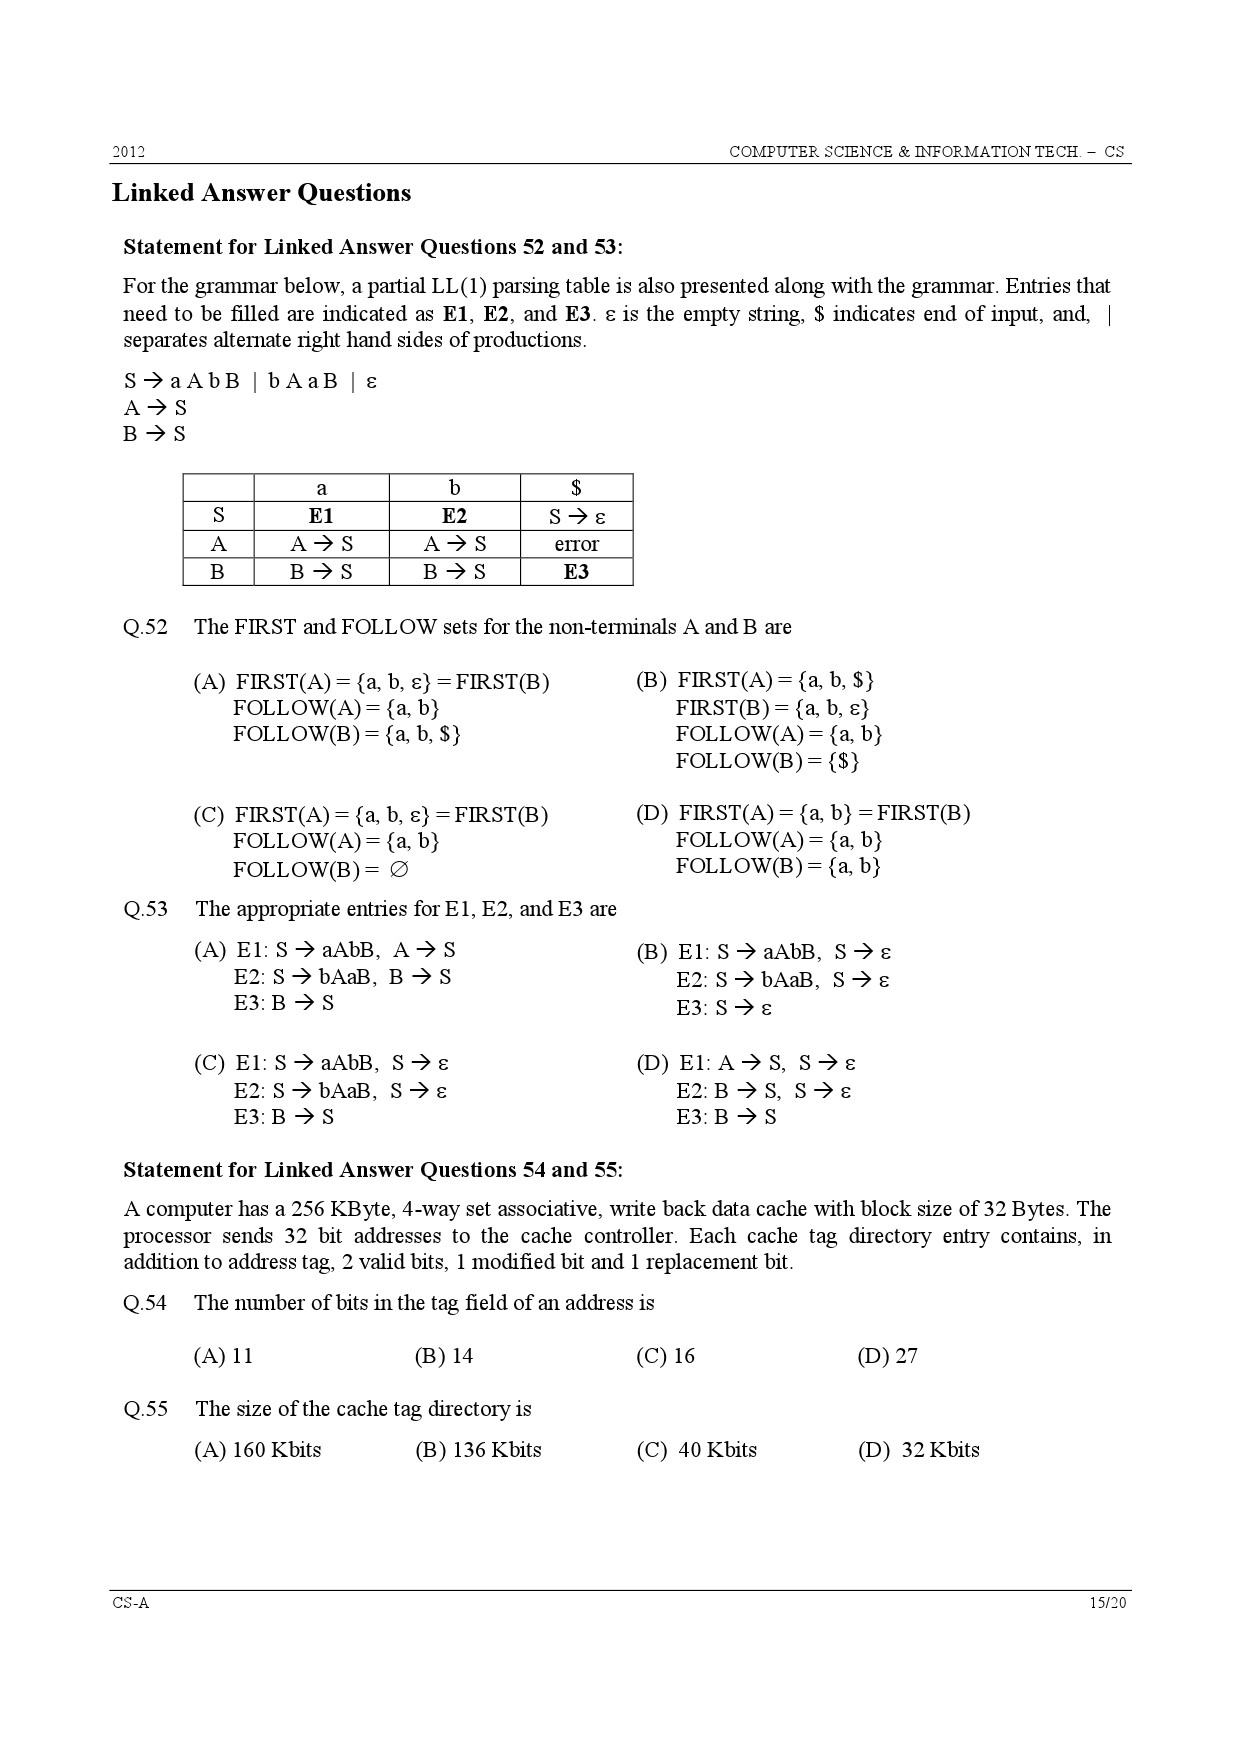 GATE Exam Question Paper 2012 Computer Science and Information Technology 15